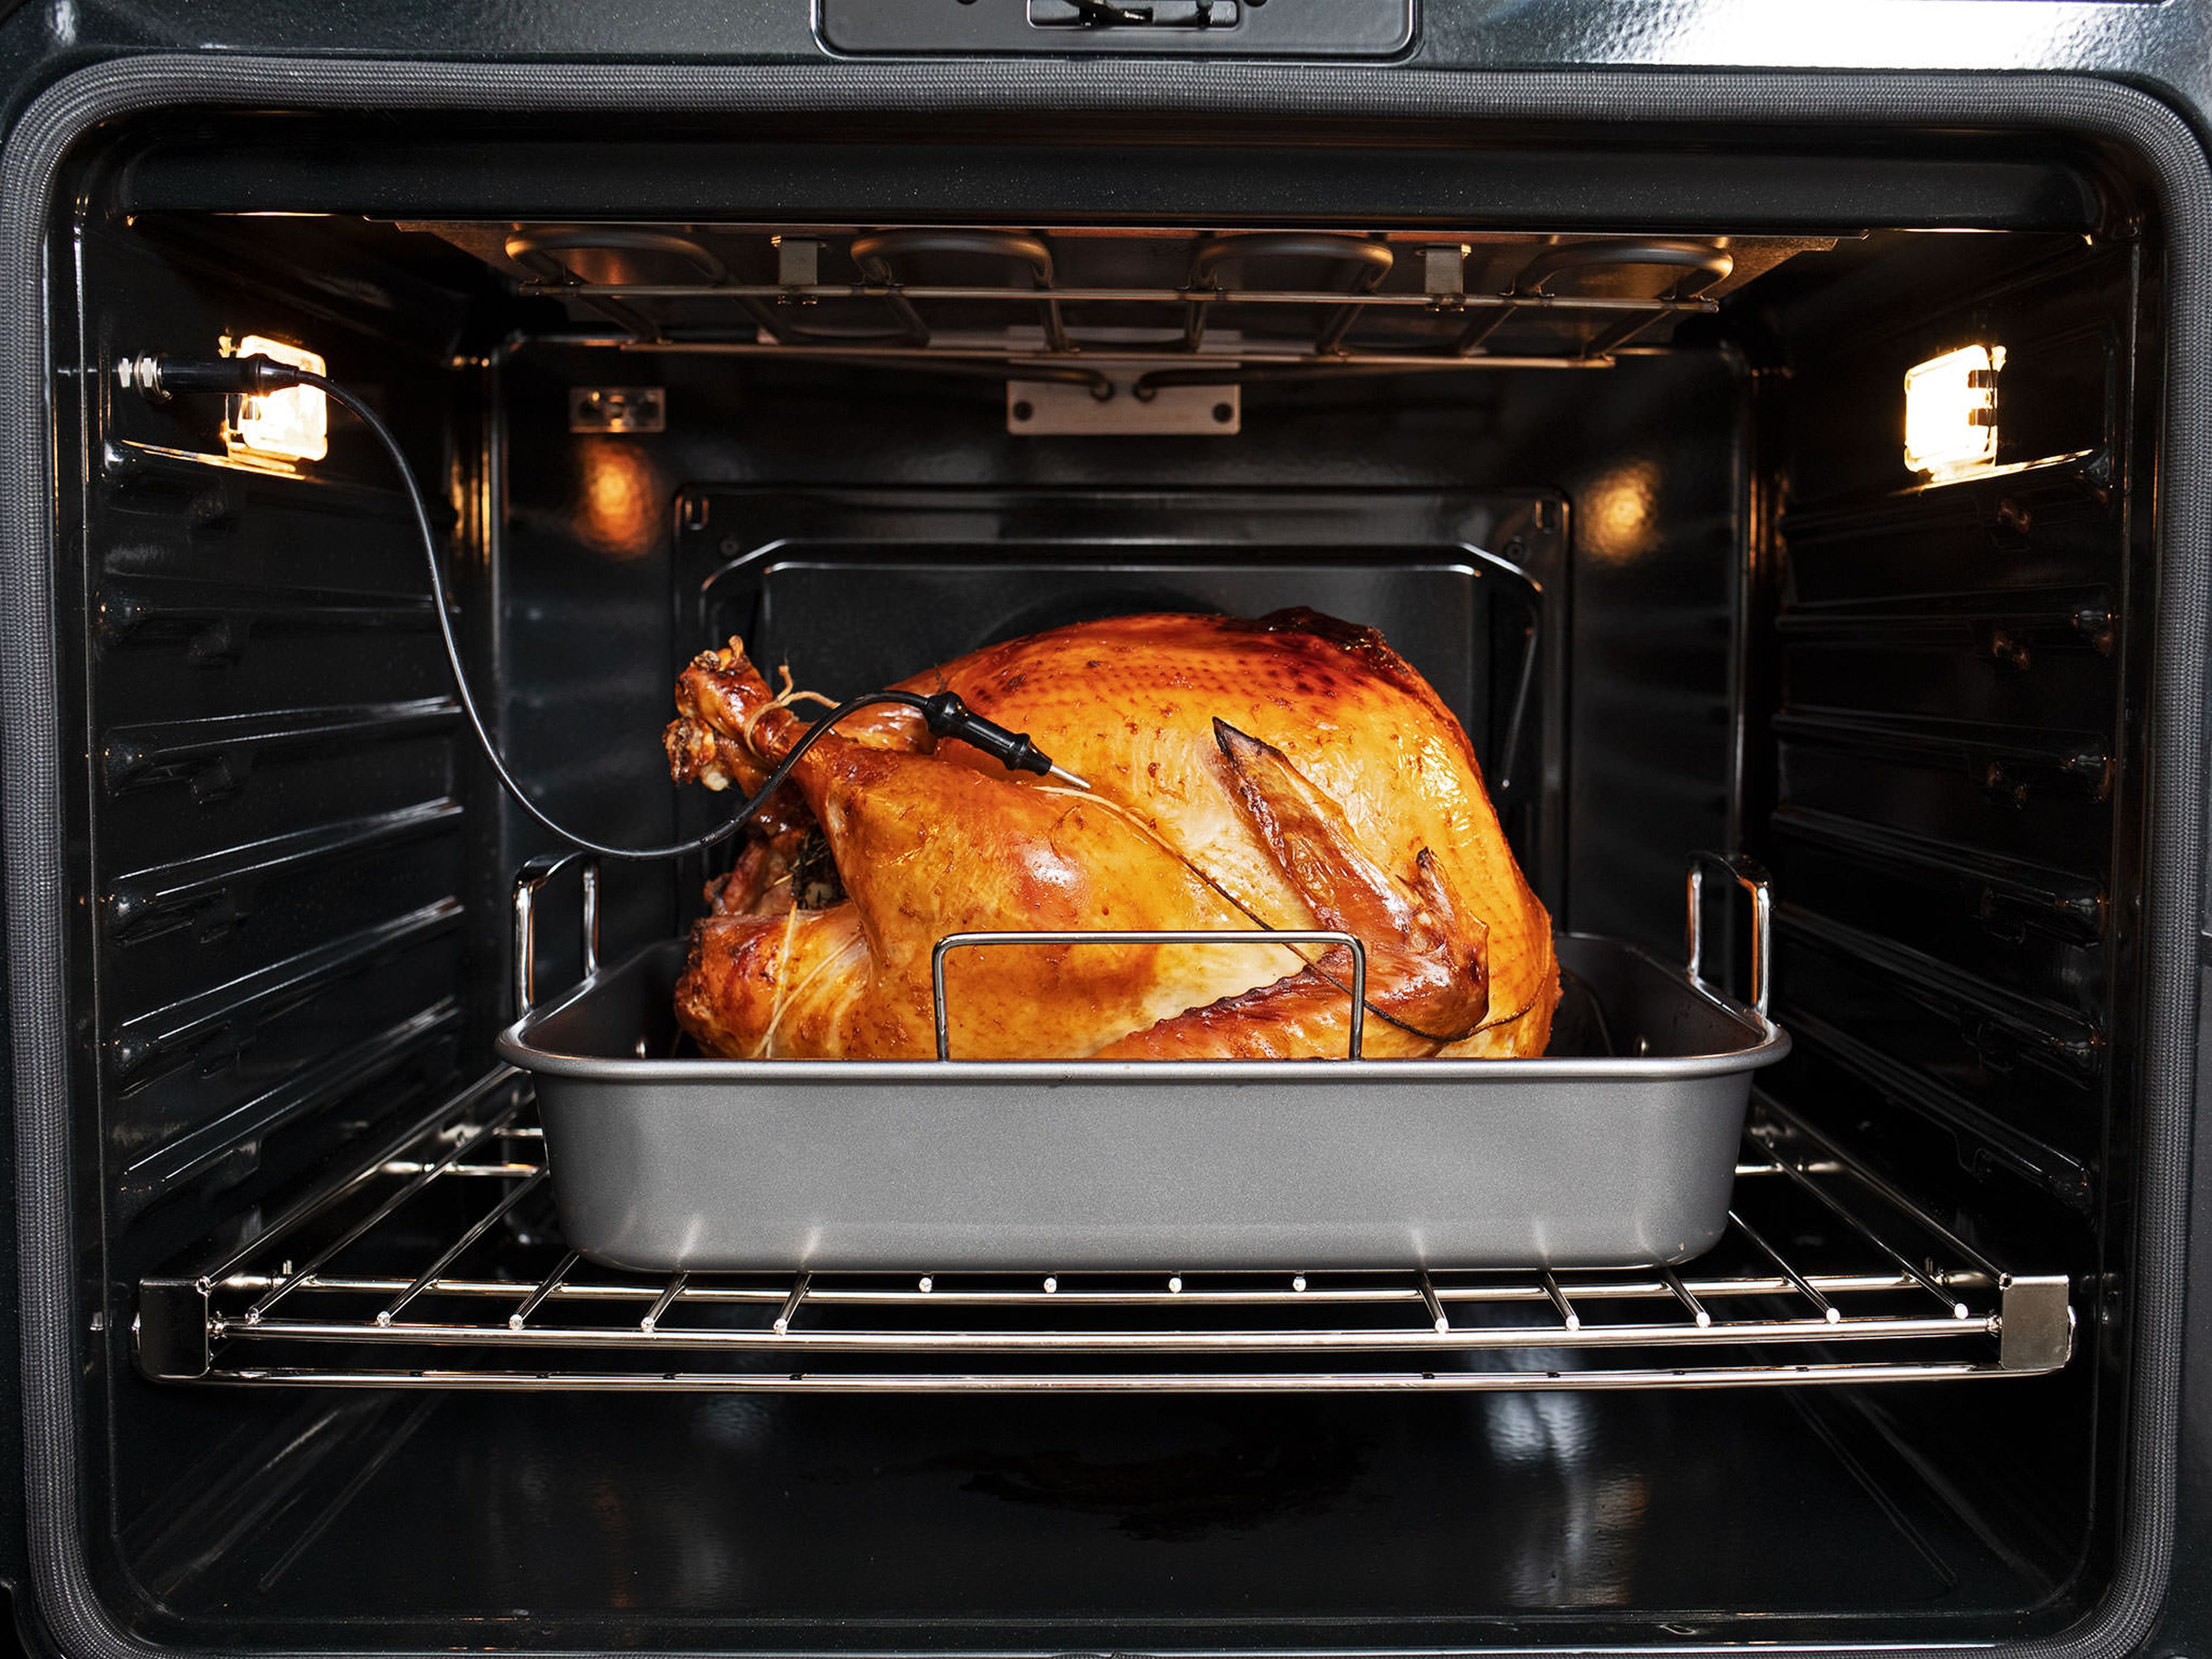 Once the turkey is browned all over, turn the oven down to 350°F/175°C and baste the turkey with the butter mixture every 15 min. Once the internal temperature of the thickest part of the breast reaches 150°F/65°C, (approx. 50 – 70 min. more) transfer turkey with roasting rack onto a baking sheet to rest for at least 30 min. or up to 1 hr. before carving. Reserve onions for serving and reserve drippings directly in roasting pan.